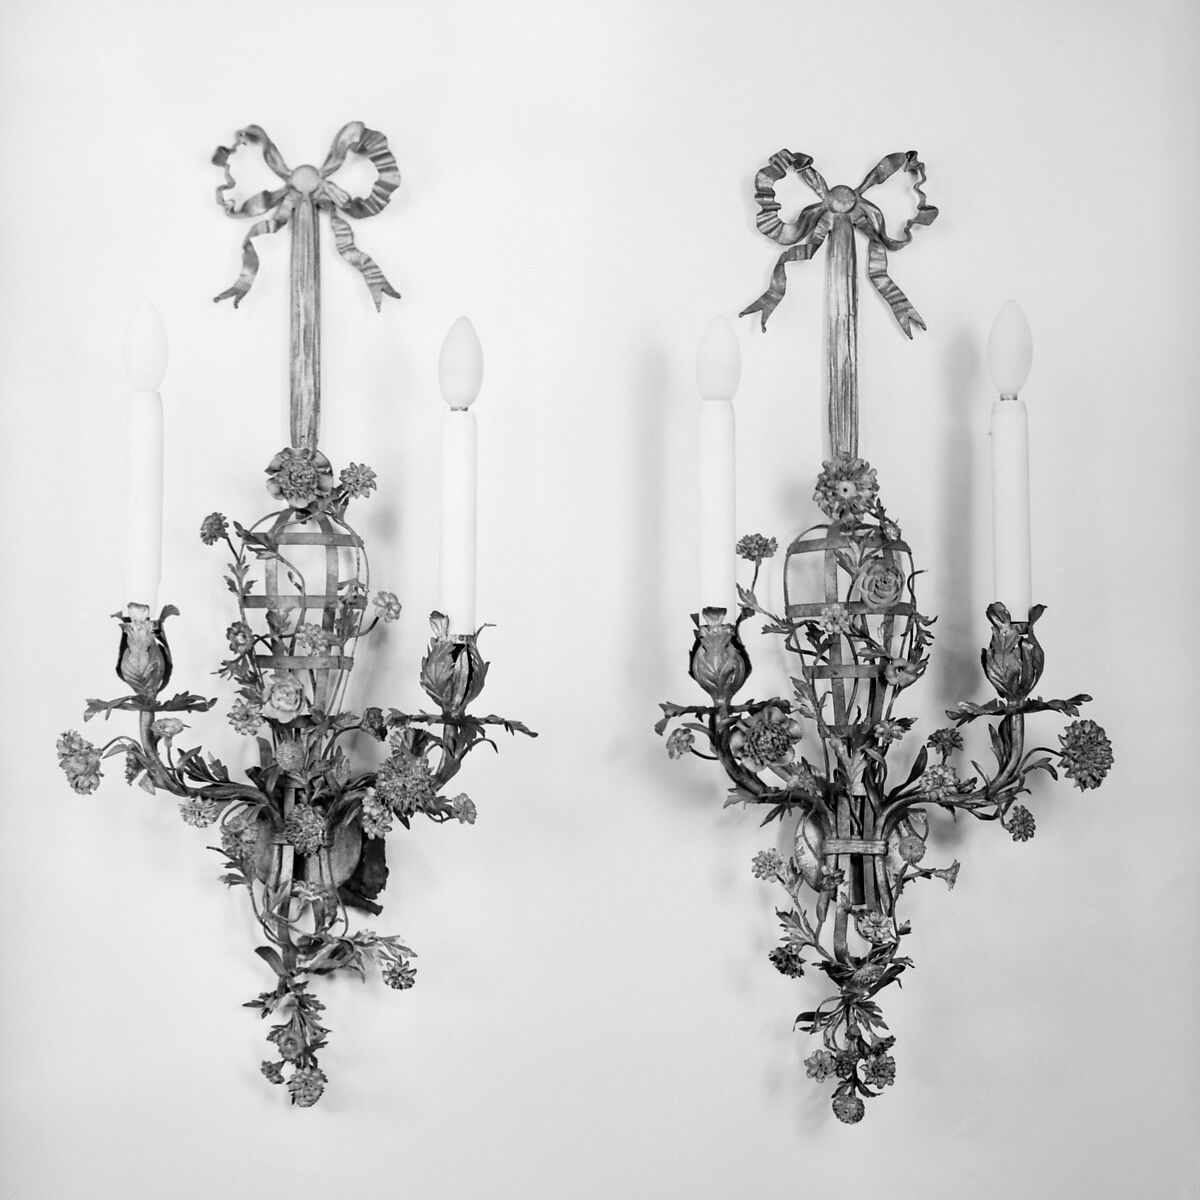 Pair of wall sconces, Brass, water-gilt (?), porcelain, probably French 